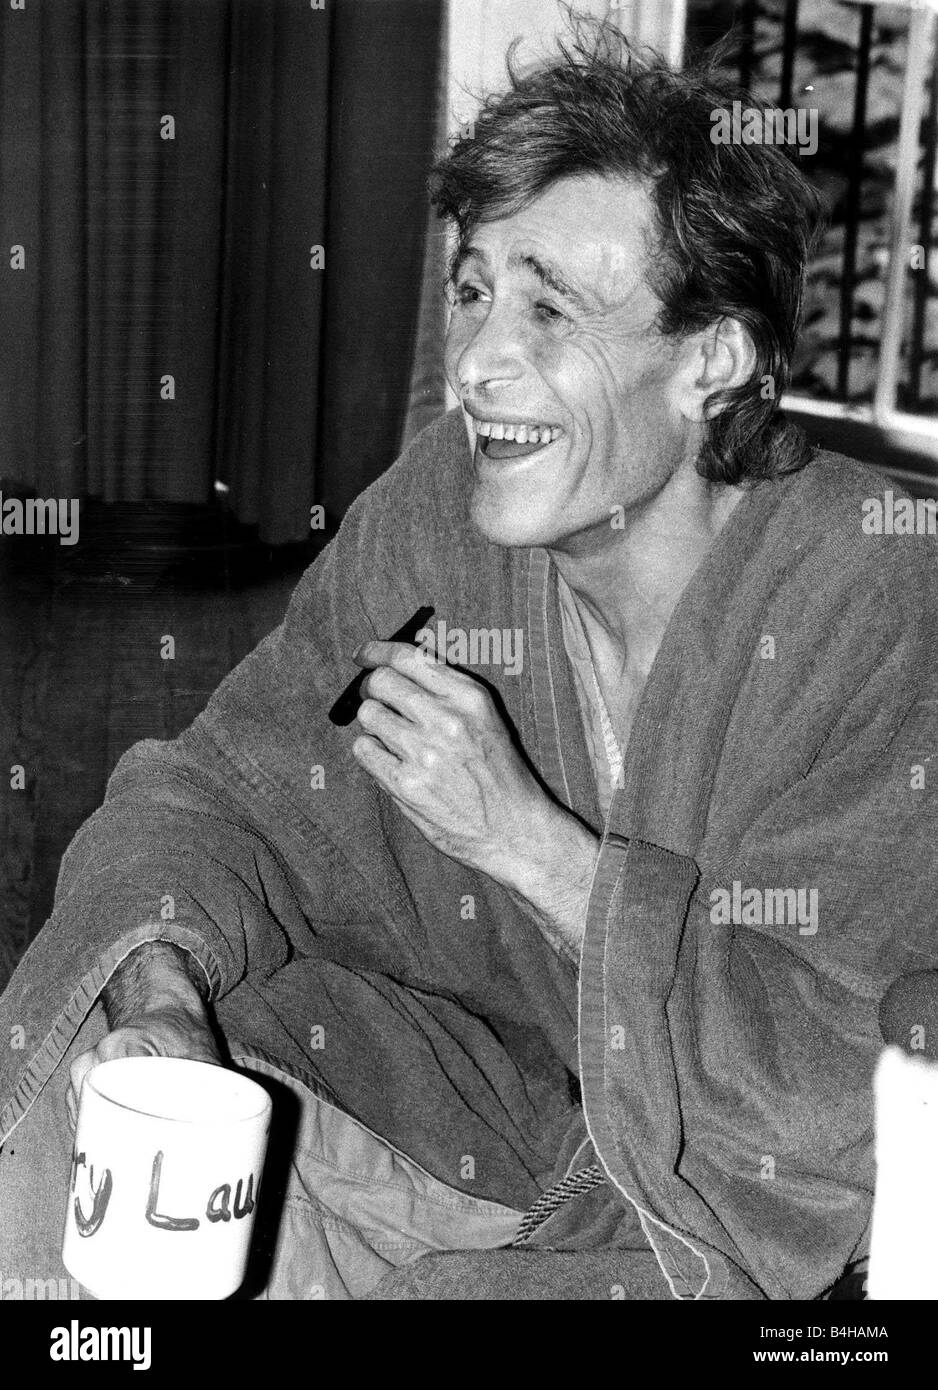 Peter O Toole September 1980 in his dressing gown the morning after he played Macbeth at the old Vic Theatre in London Stock Photo